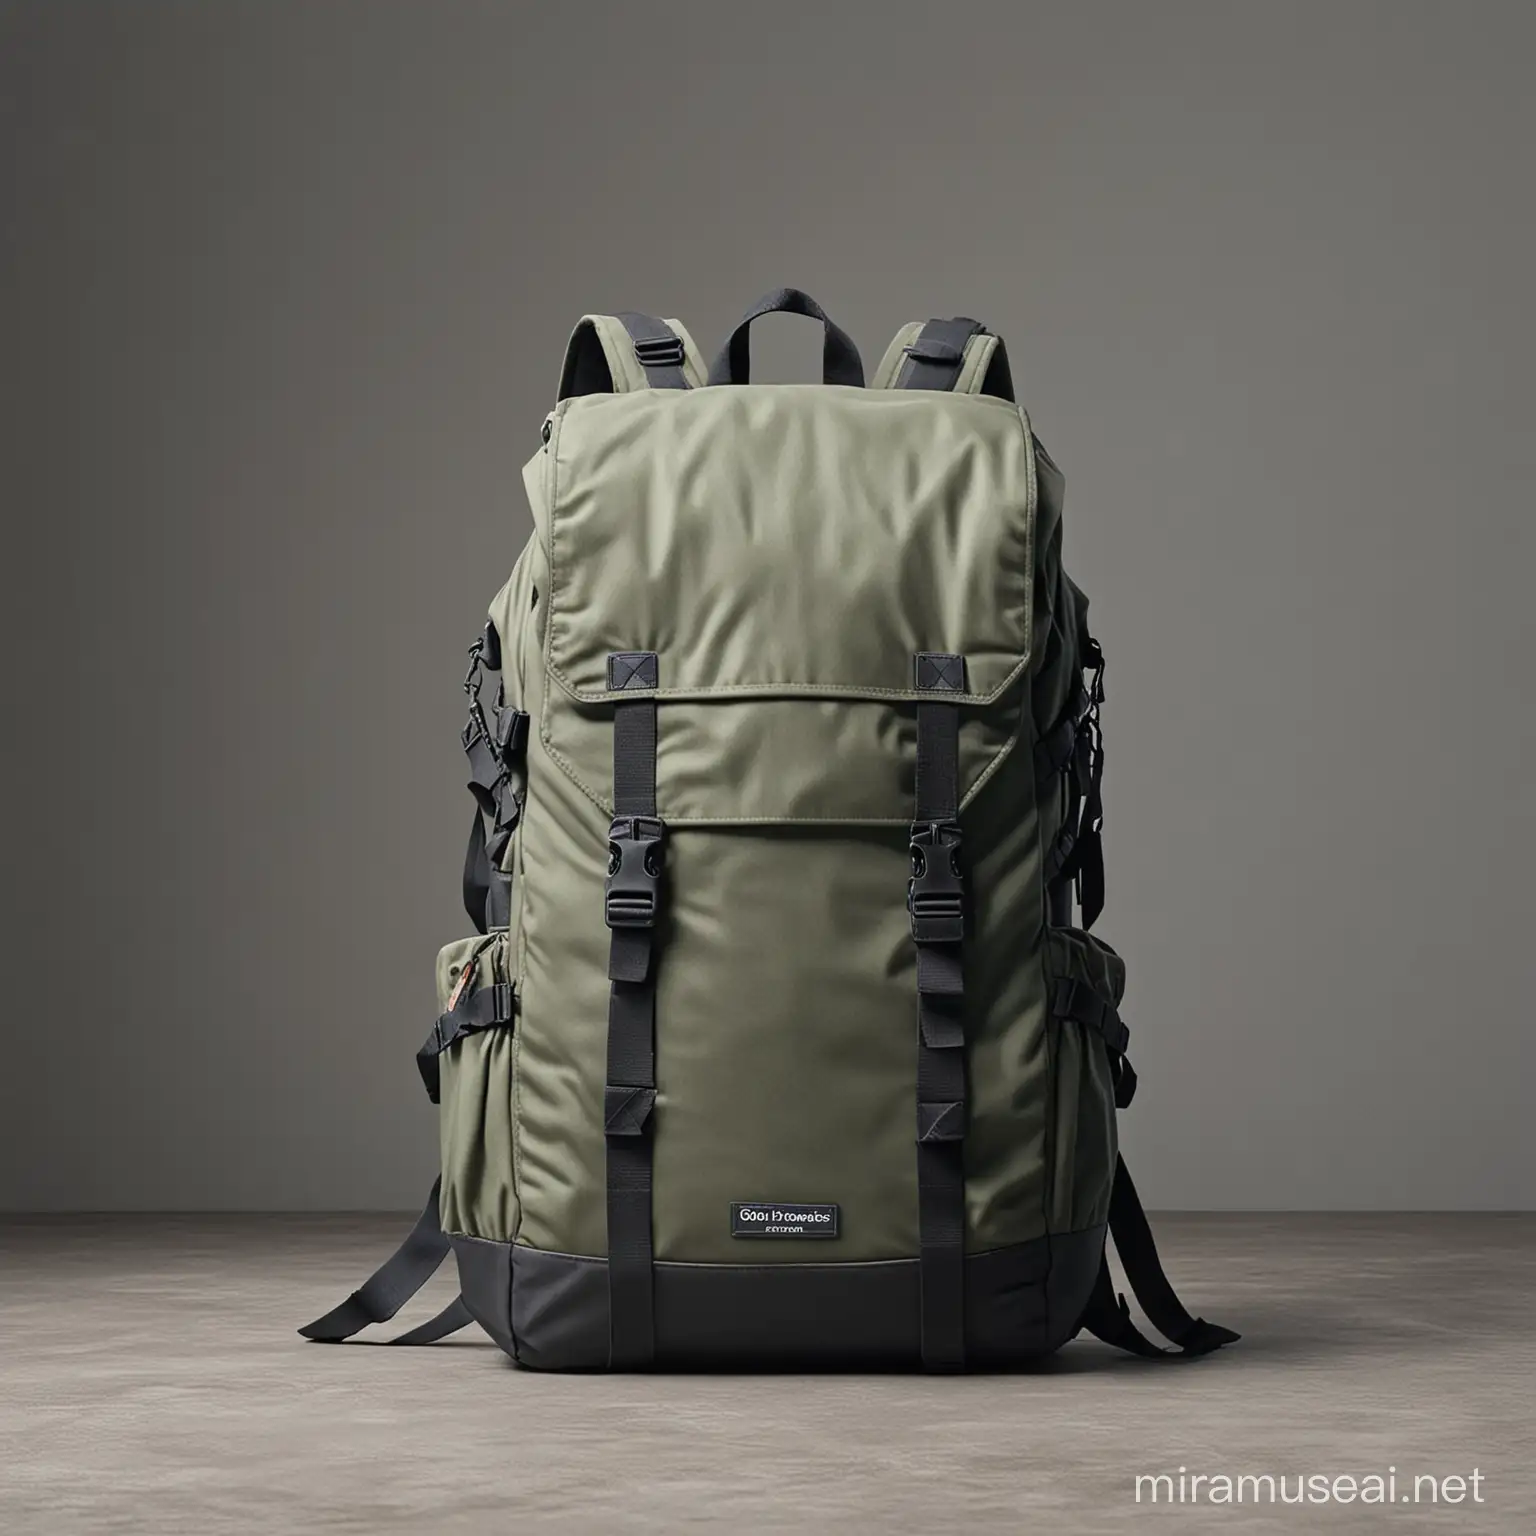 adv for backpack withouth people